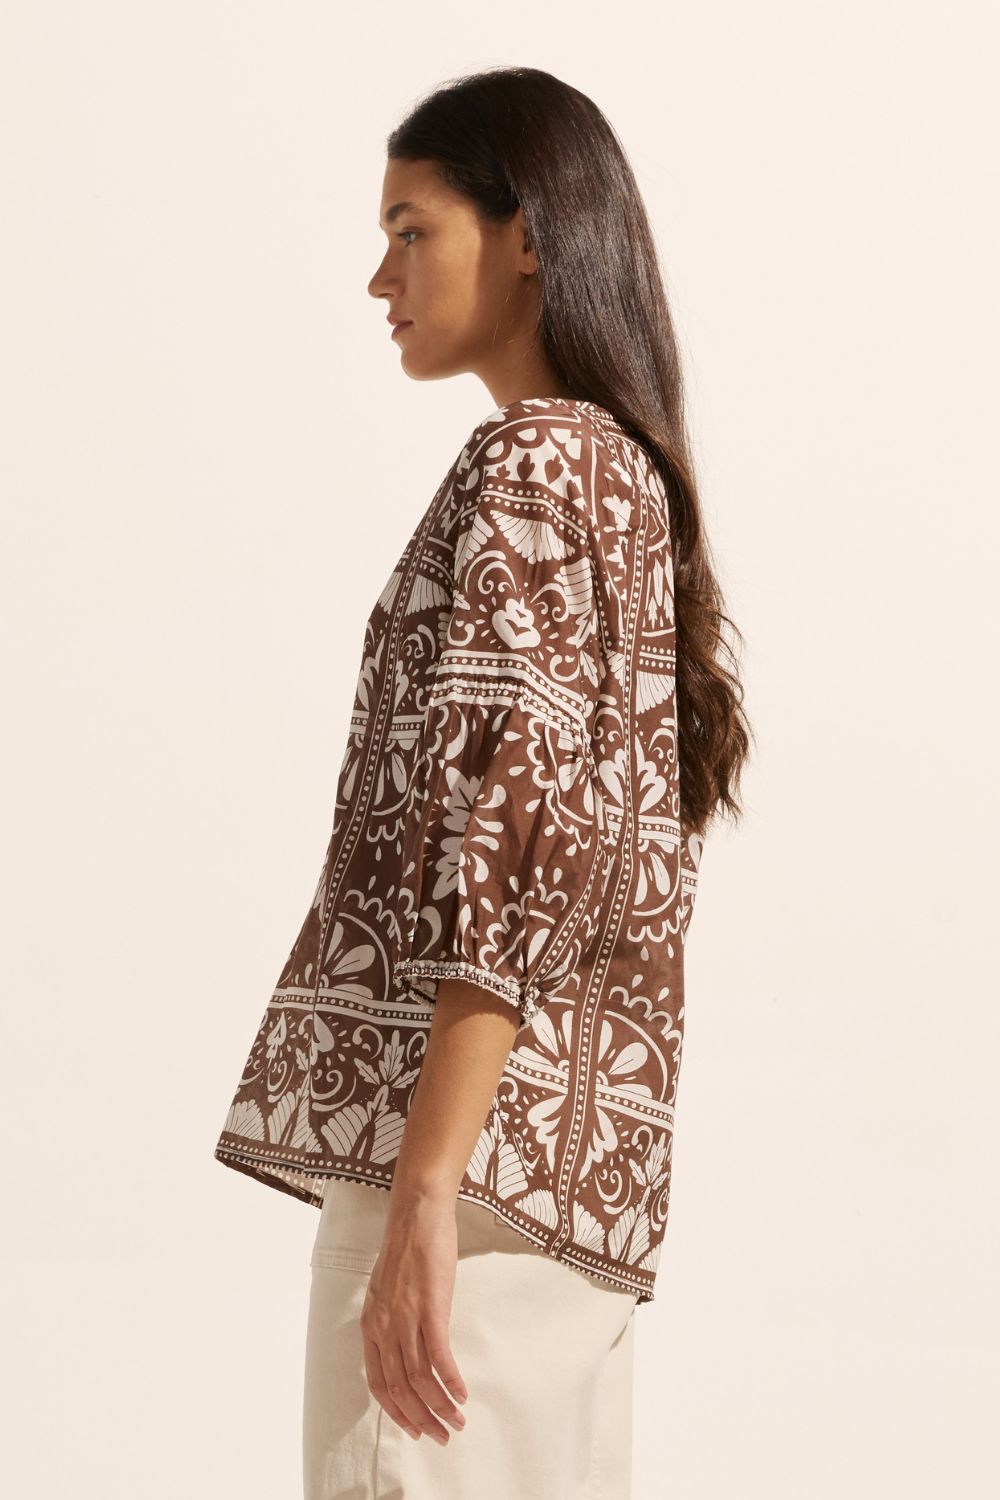 brown and white print, rounded neckline, mid length sleeve, side view